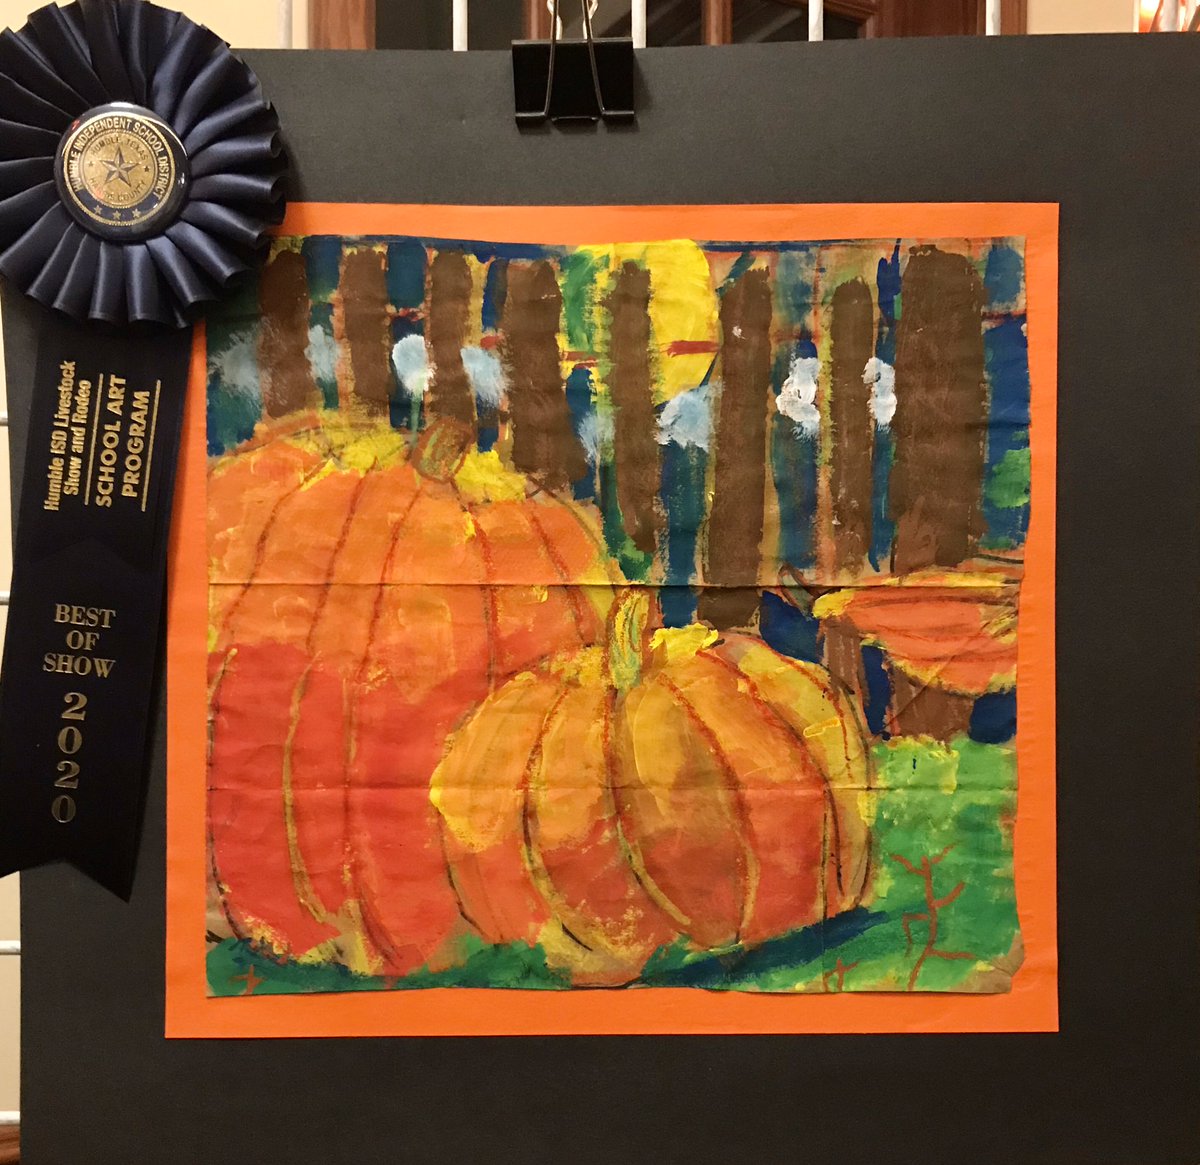 Congrats to @HumbleISD_BBE  @VisualArtHumble 3rd grader on her top honor, #BestofShow at the @HumbleISD #RodeoArt Show. Way to go Kaitlyn!!! #elmerpride